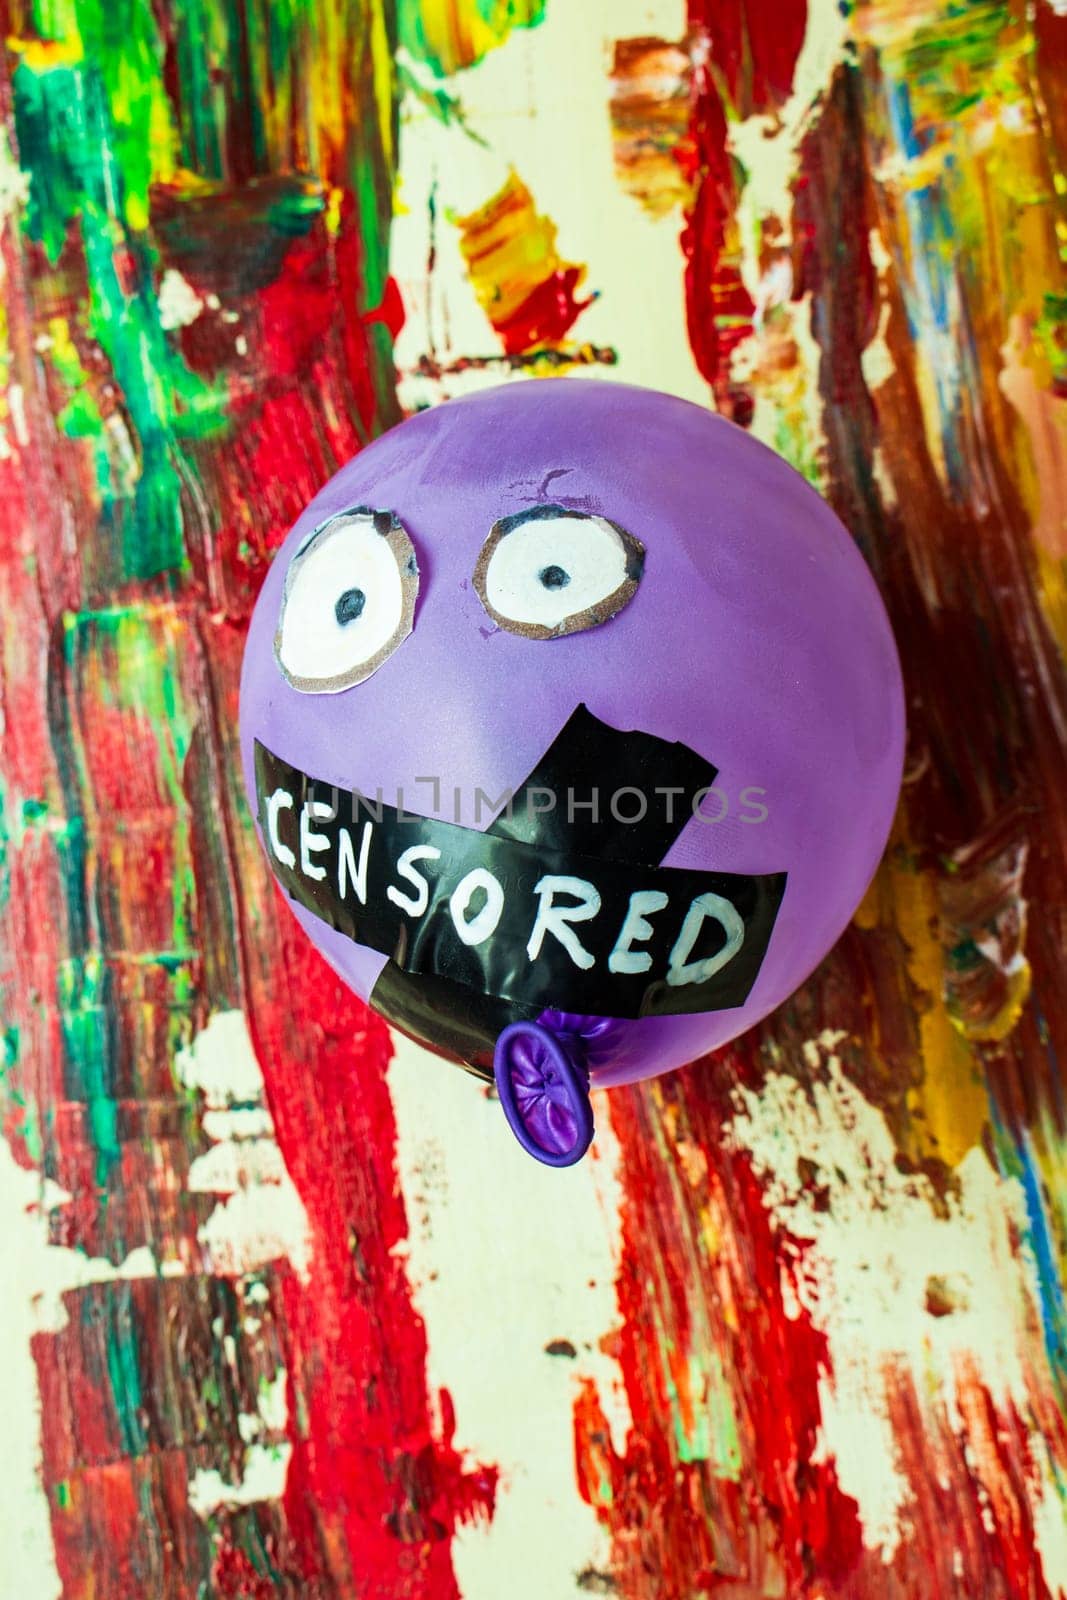 In a vivid juxtaposition of color and constraint, behold this symbolic image featuring a balloon with its mouth taped shut, suspended against a backdrop of vibrant, colorful painting